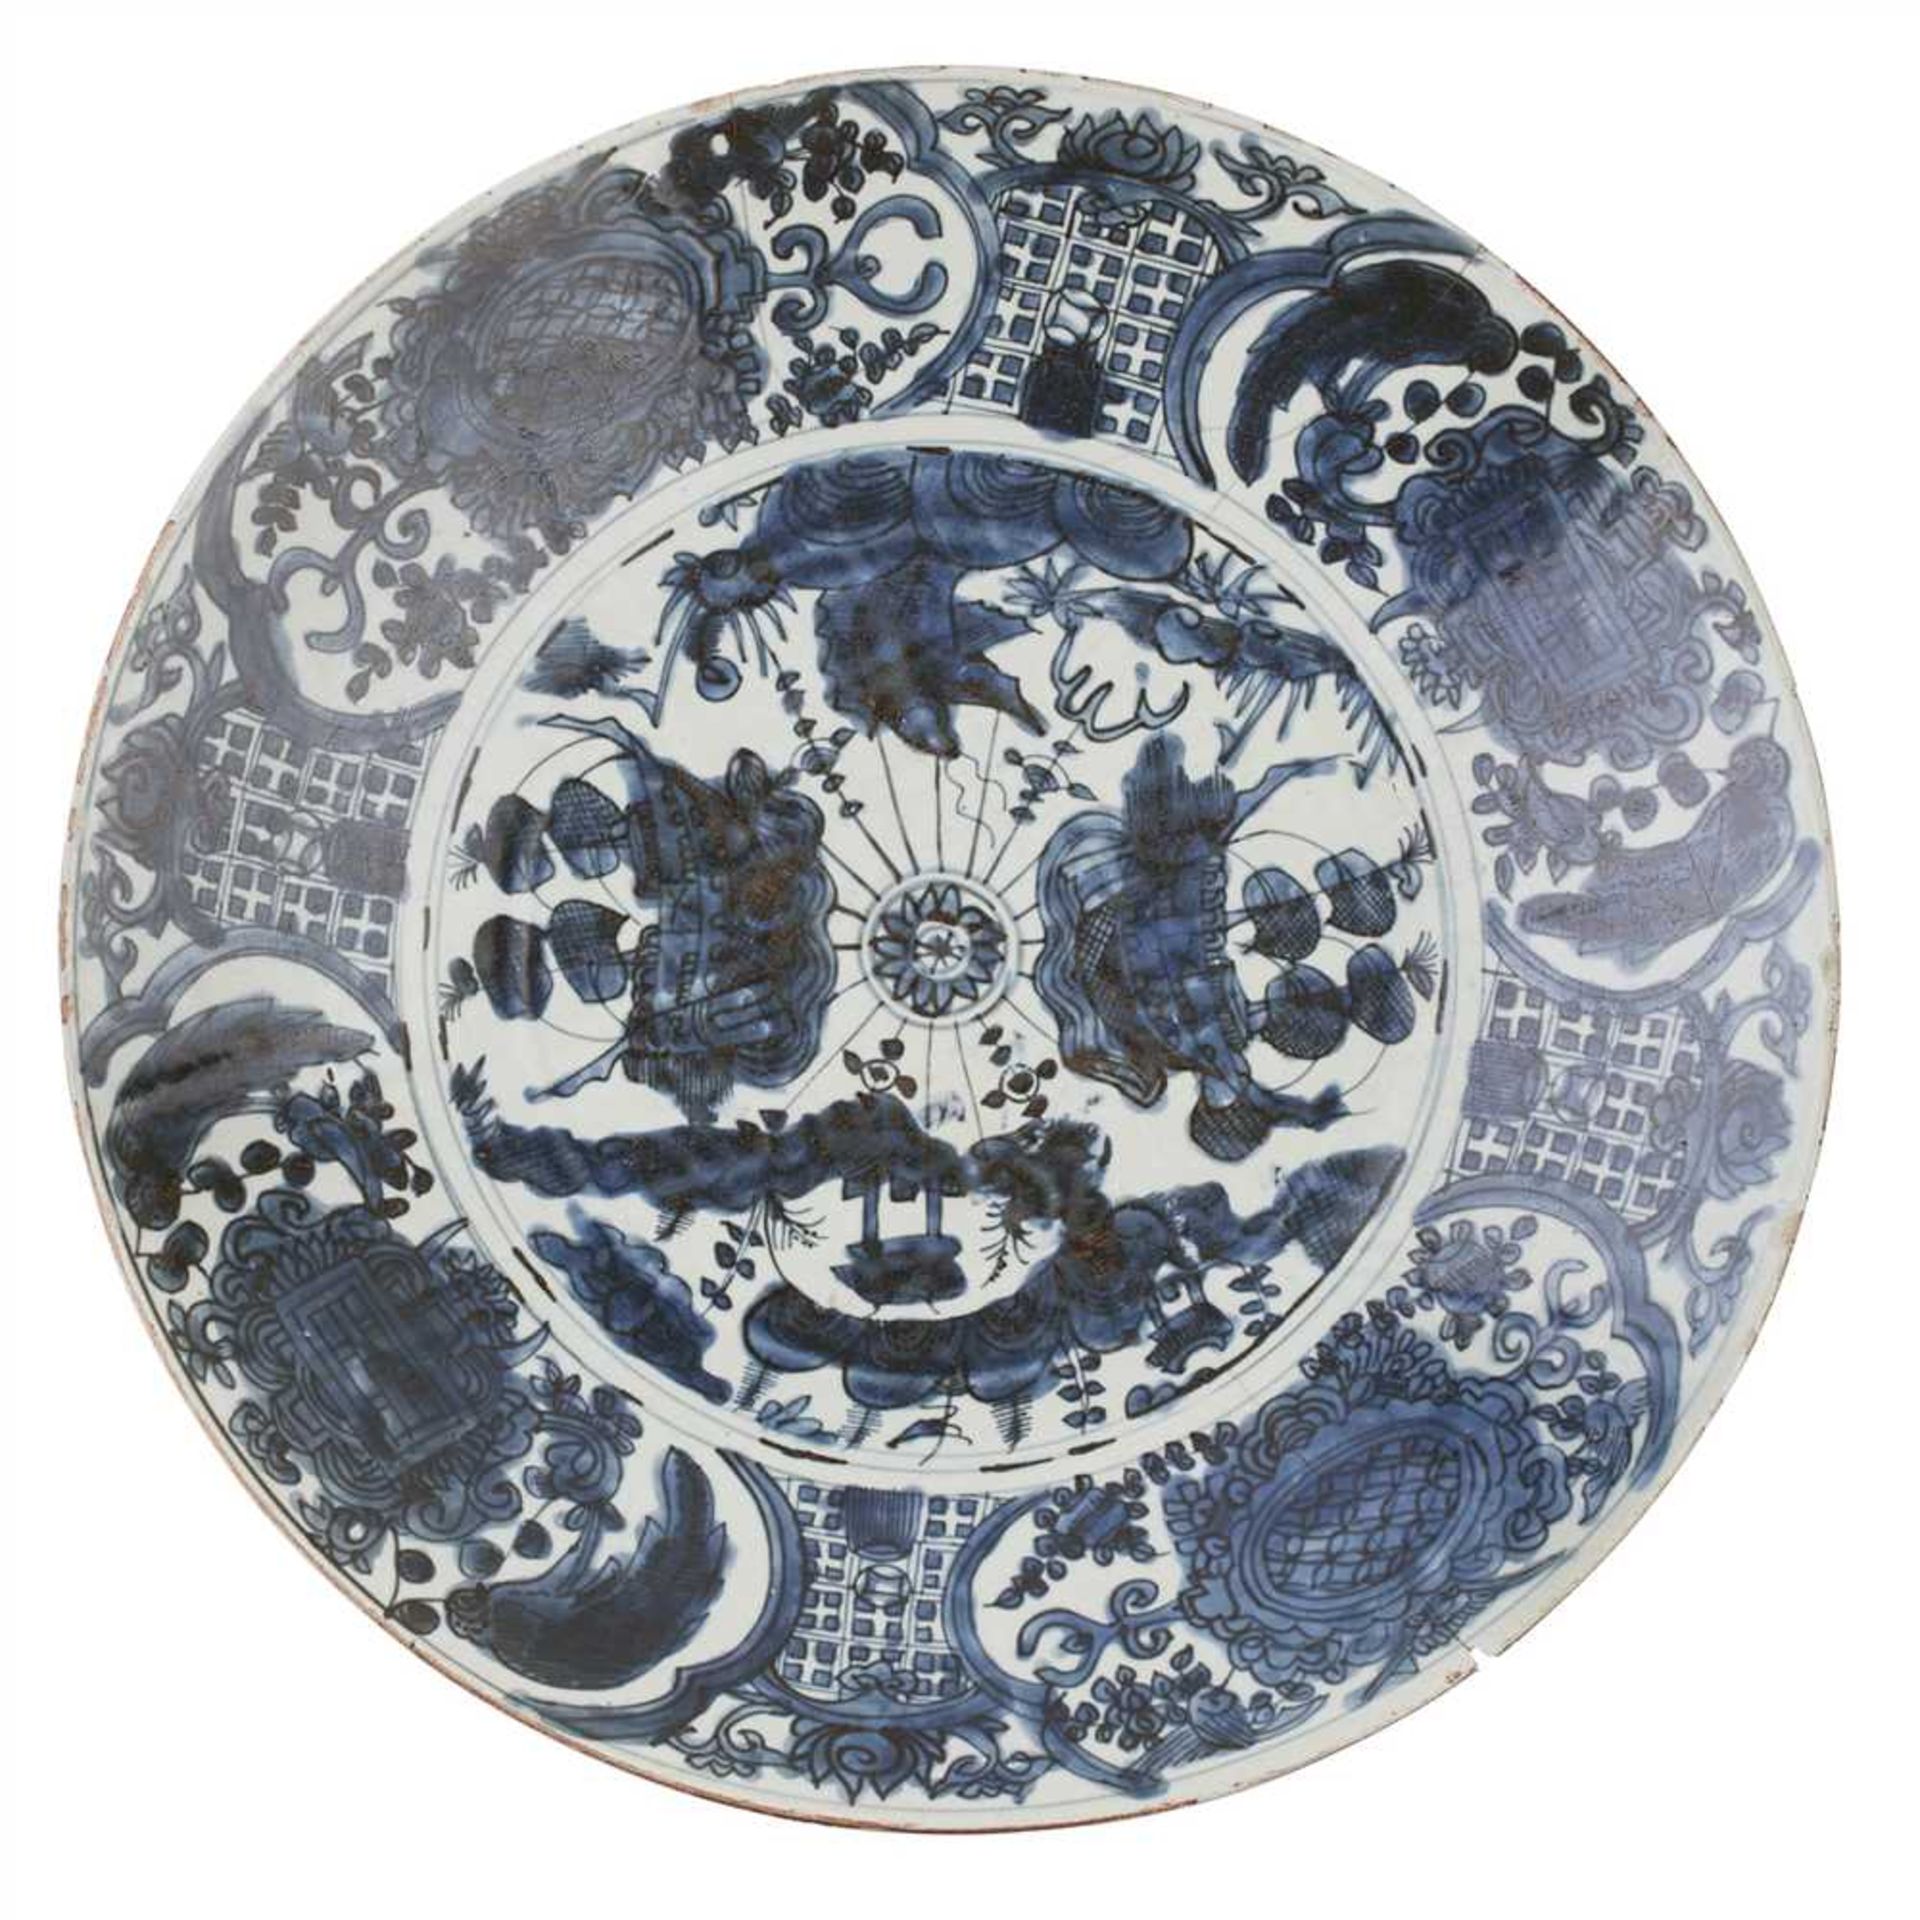 LARGE SWATOW BLUE AND WHITE CHARGER MING DYNASTY, 16TH-17TH CENTURY